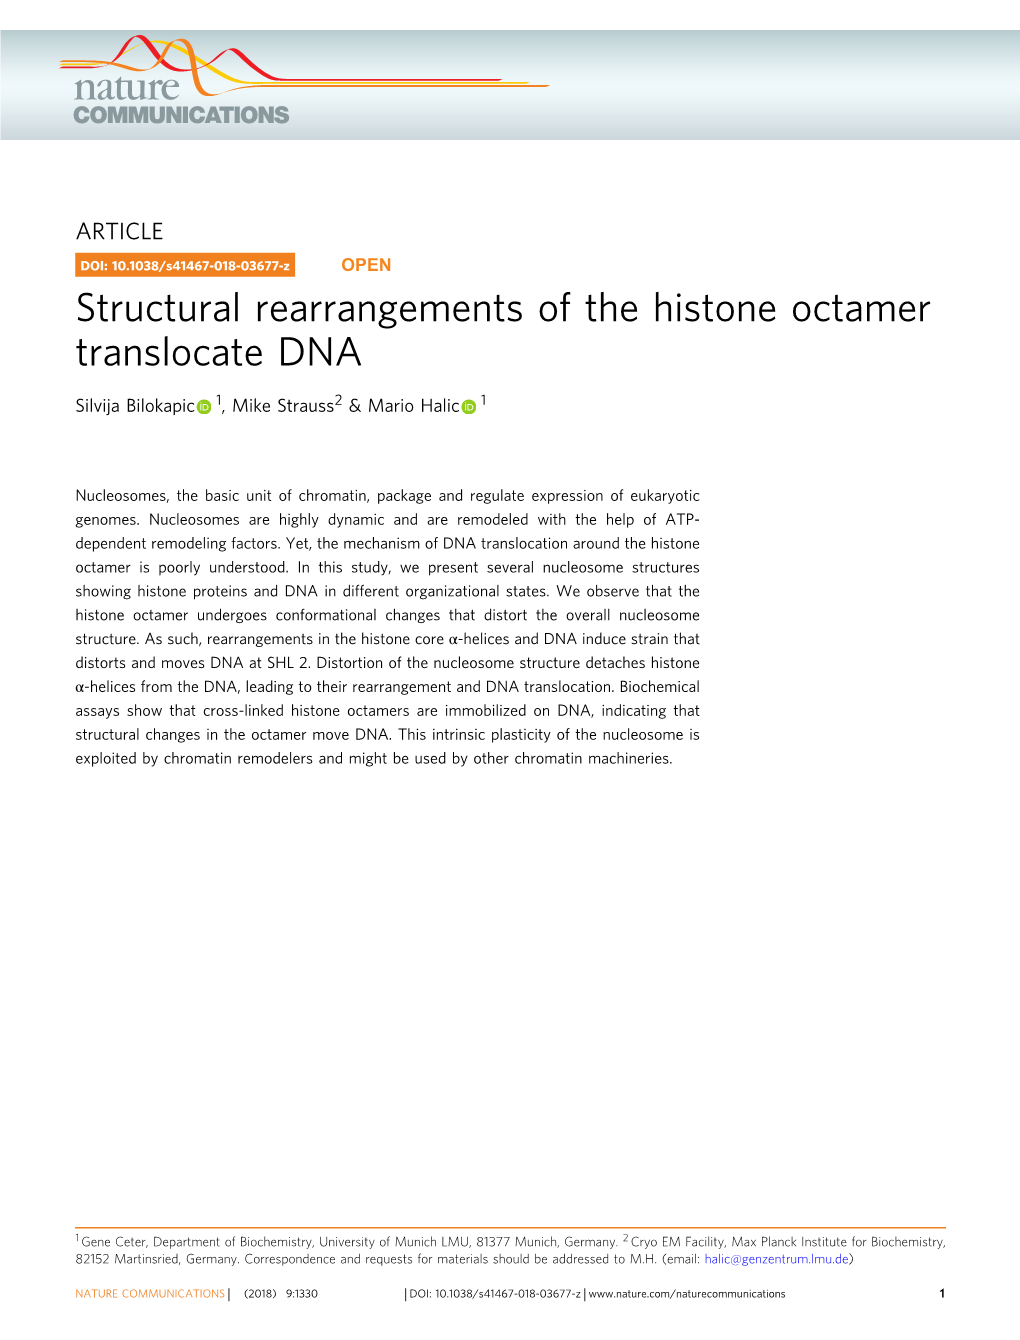 Structural Rearrangements of the Histone Octamer Translocate DNA